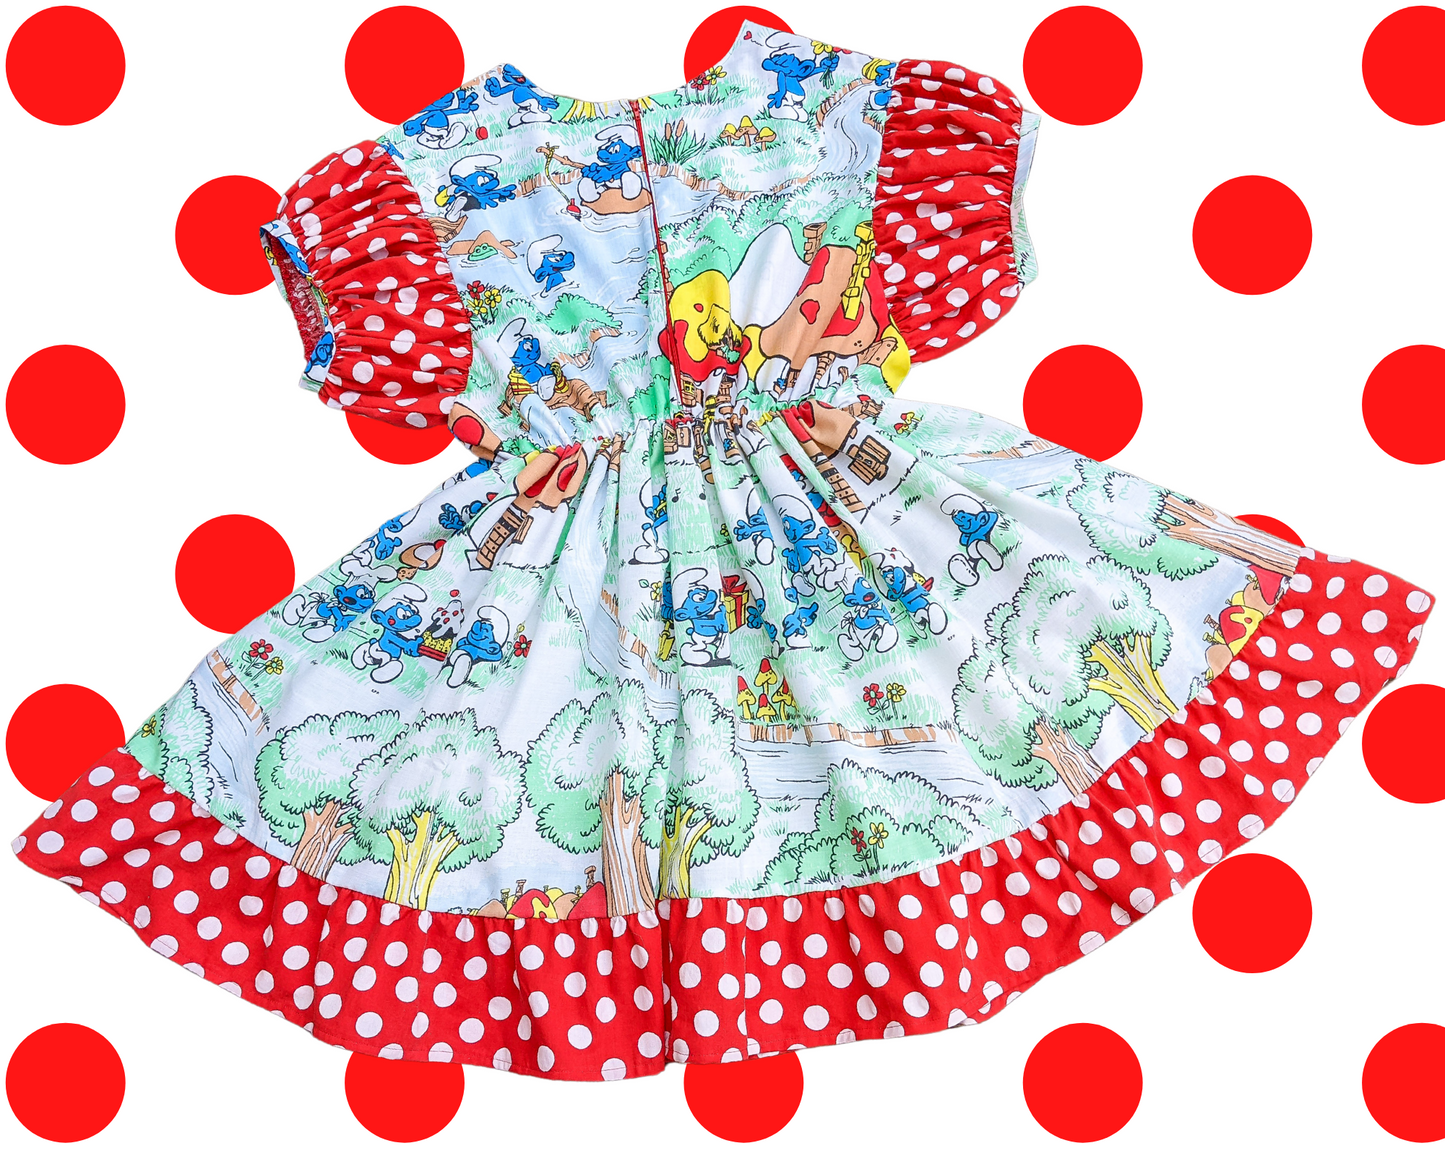 Handmade, Upcycled The Smurfs Bedsheet Dress with Red and White Polka Dot Fabric, Short Puffy Sleeves Size 2XL